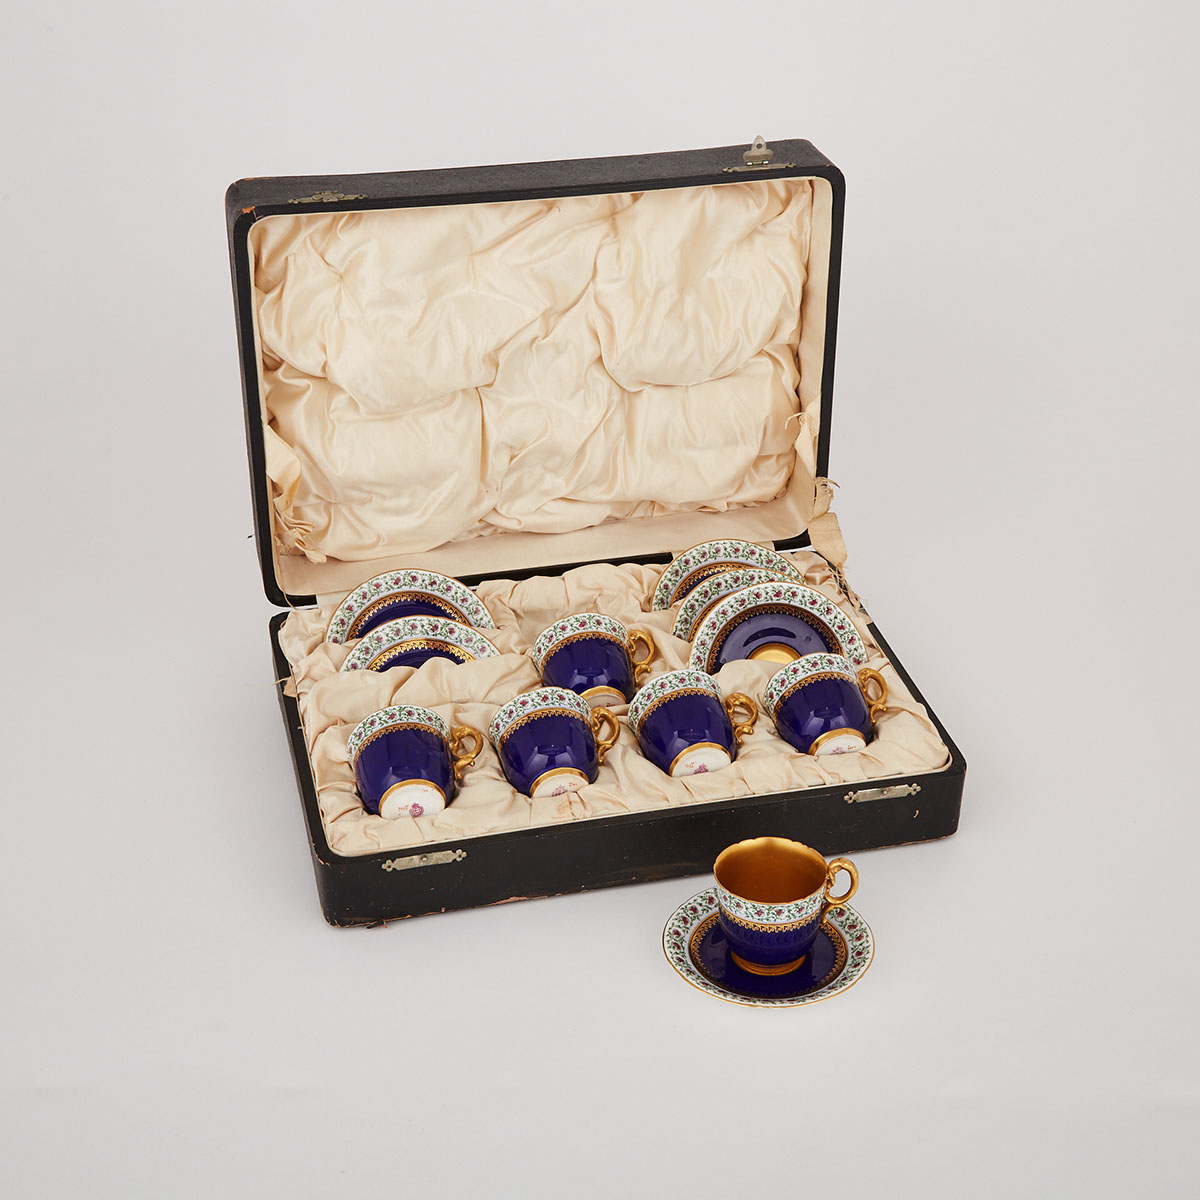 Six Royal Worcester Coffee Cups and Saucers, 1912